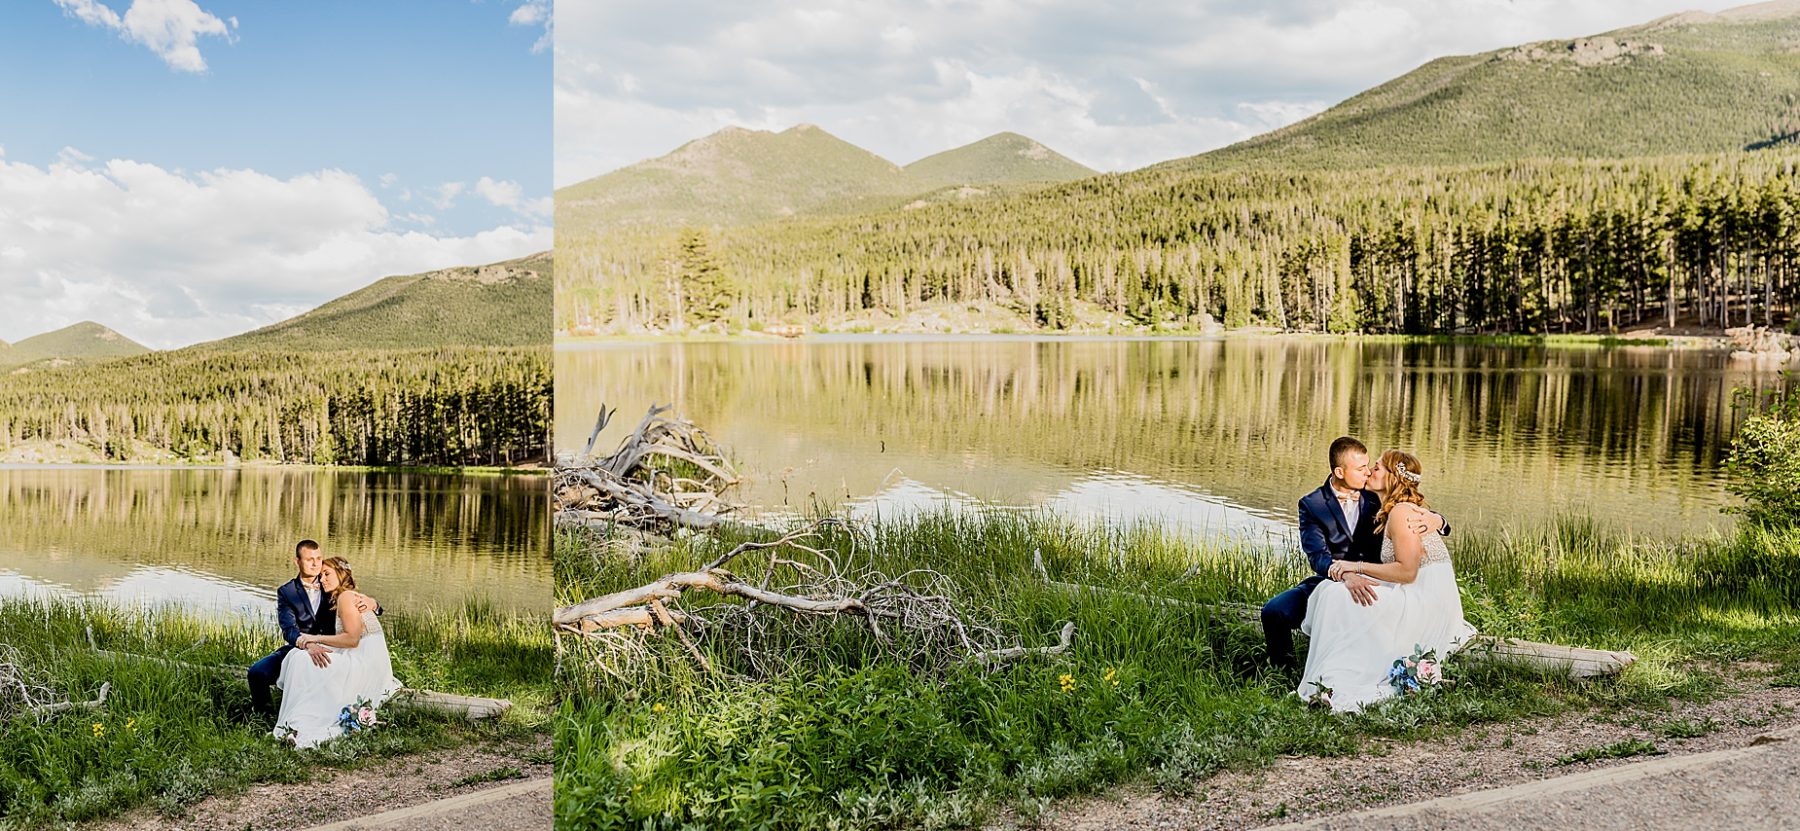 bride and groom together at Sprague Lake with gorgeous backdrop featuring trees and mountains